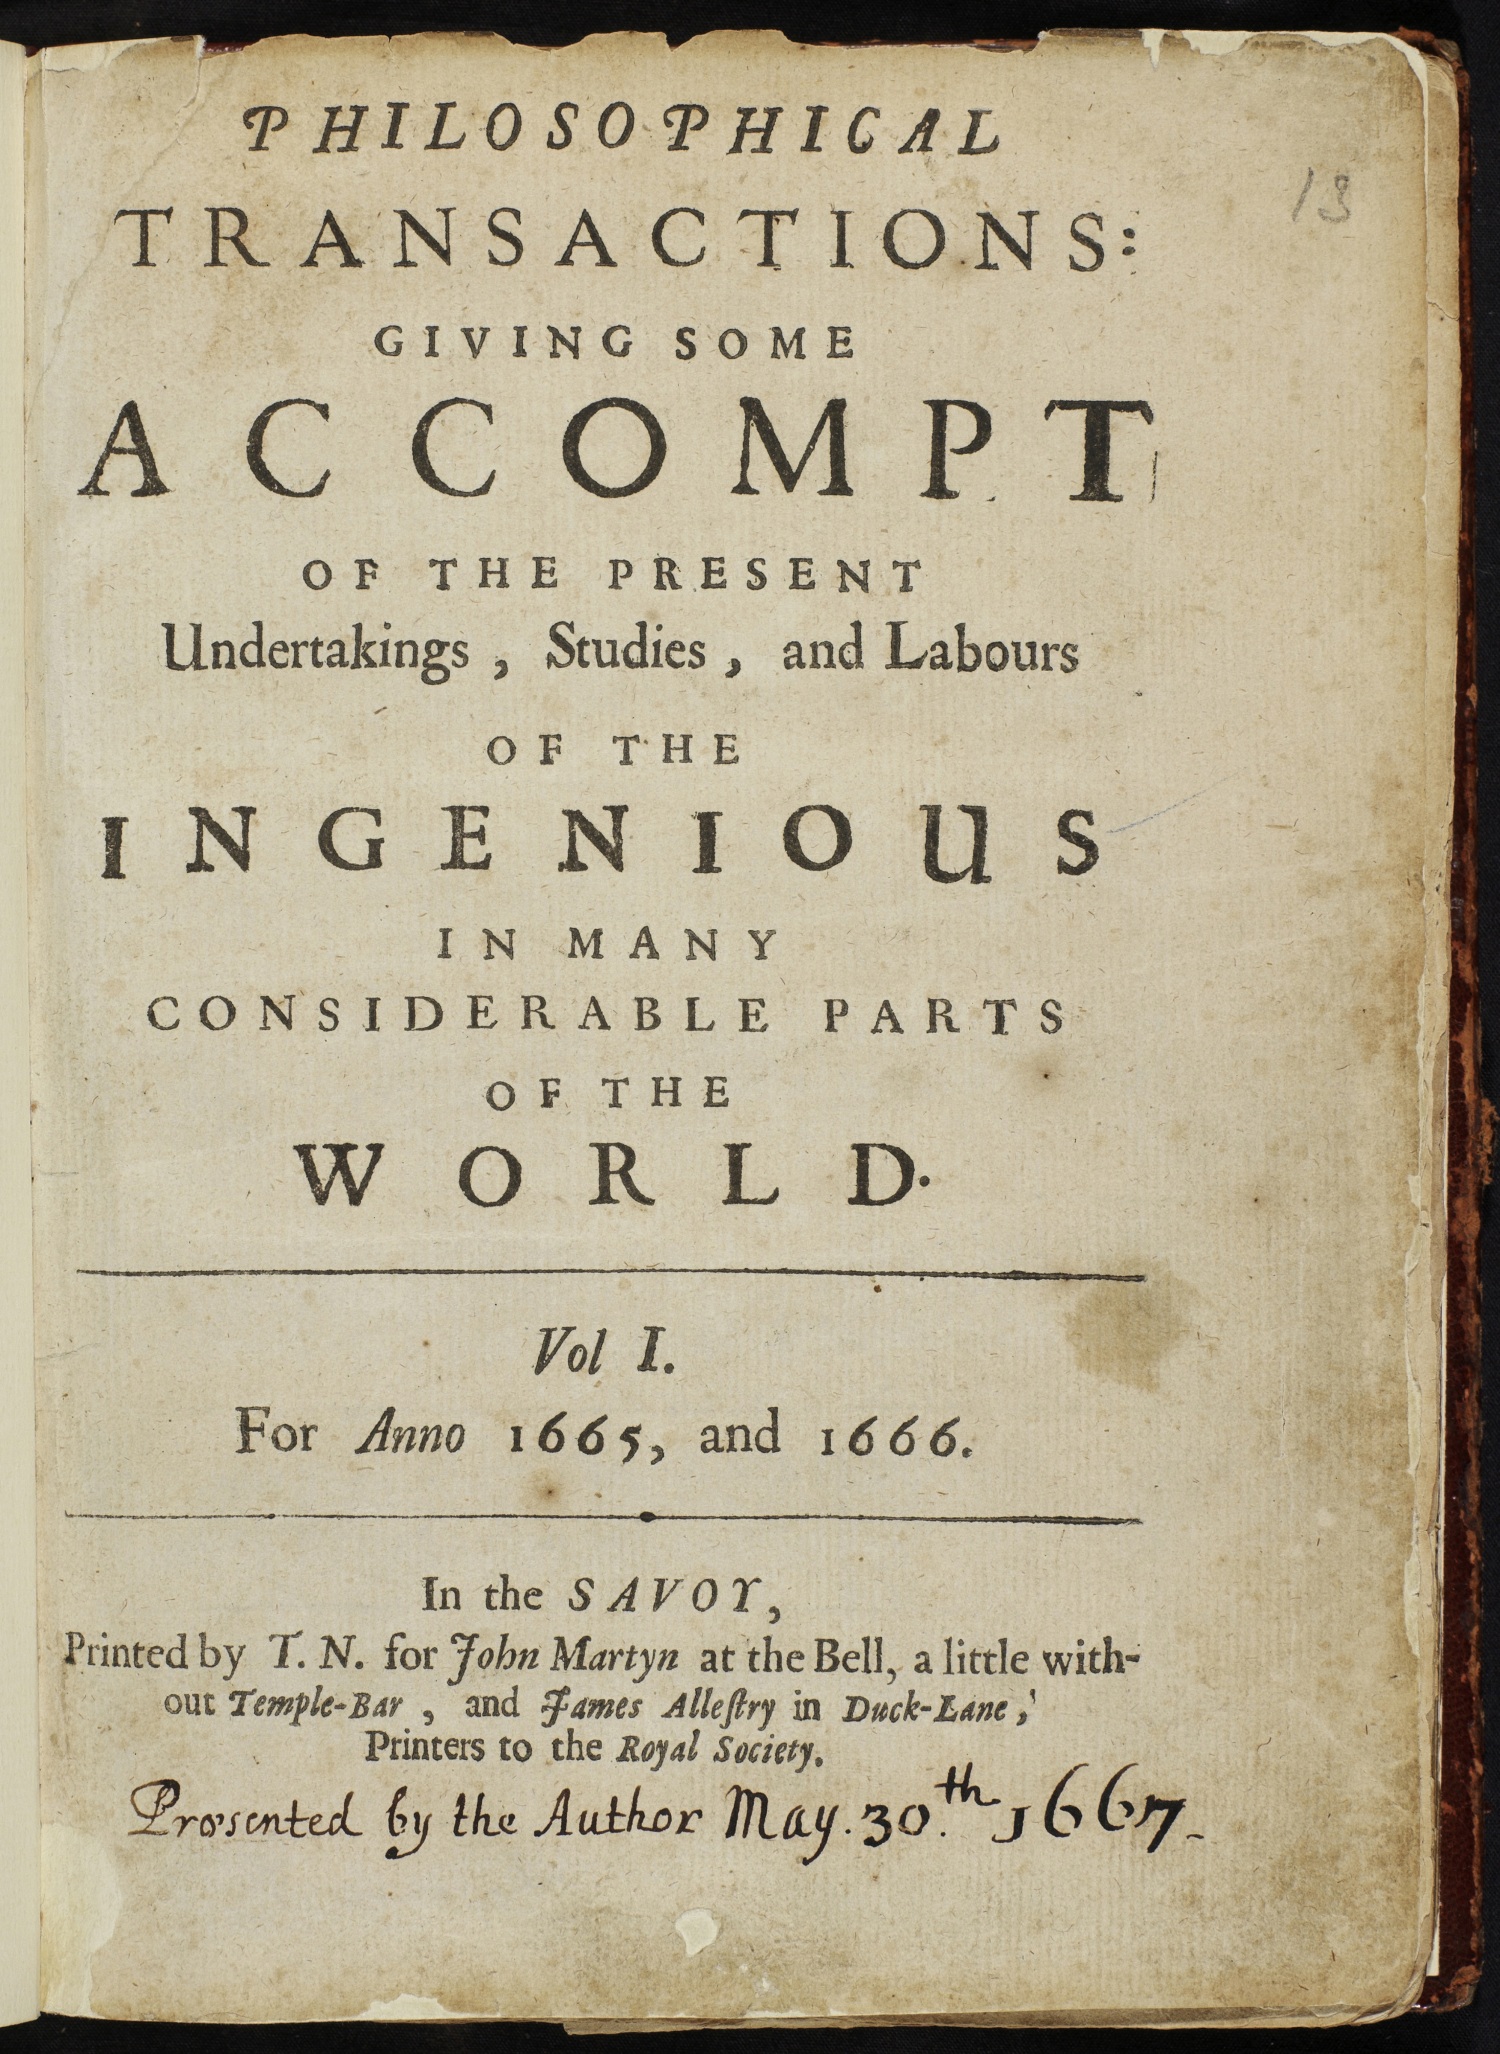 Image of the title page from the Philosophical Transactions featuring volume 1, years 1665-1666.